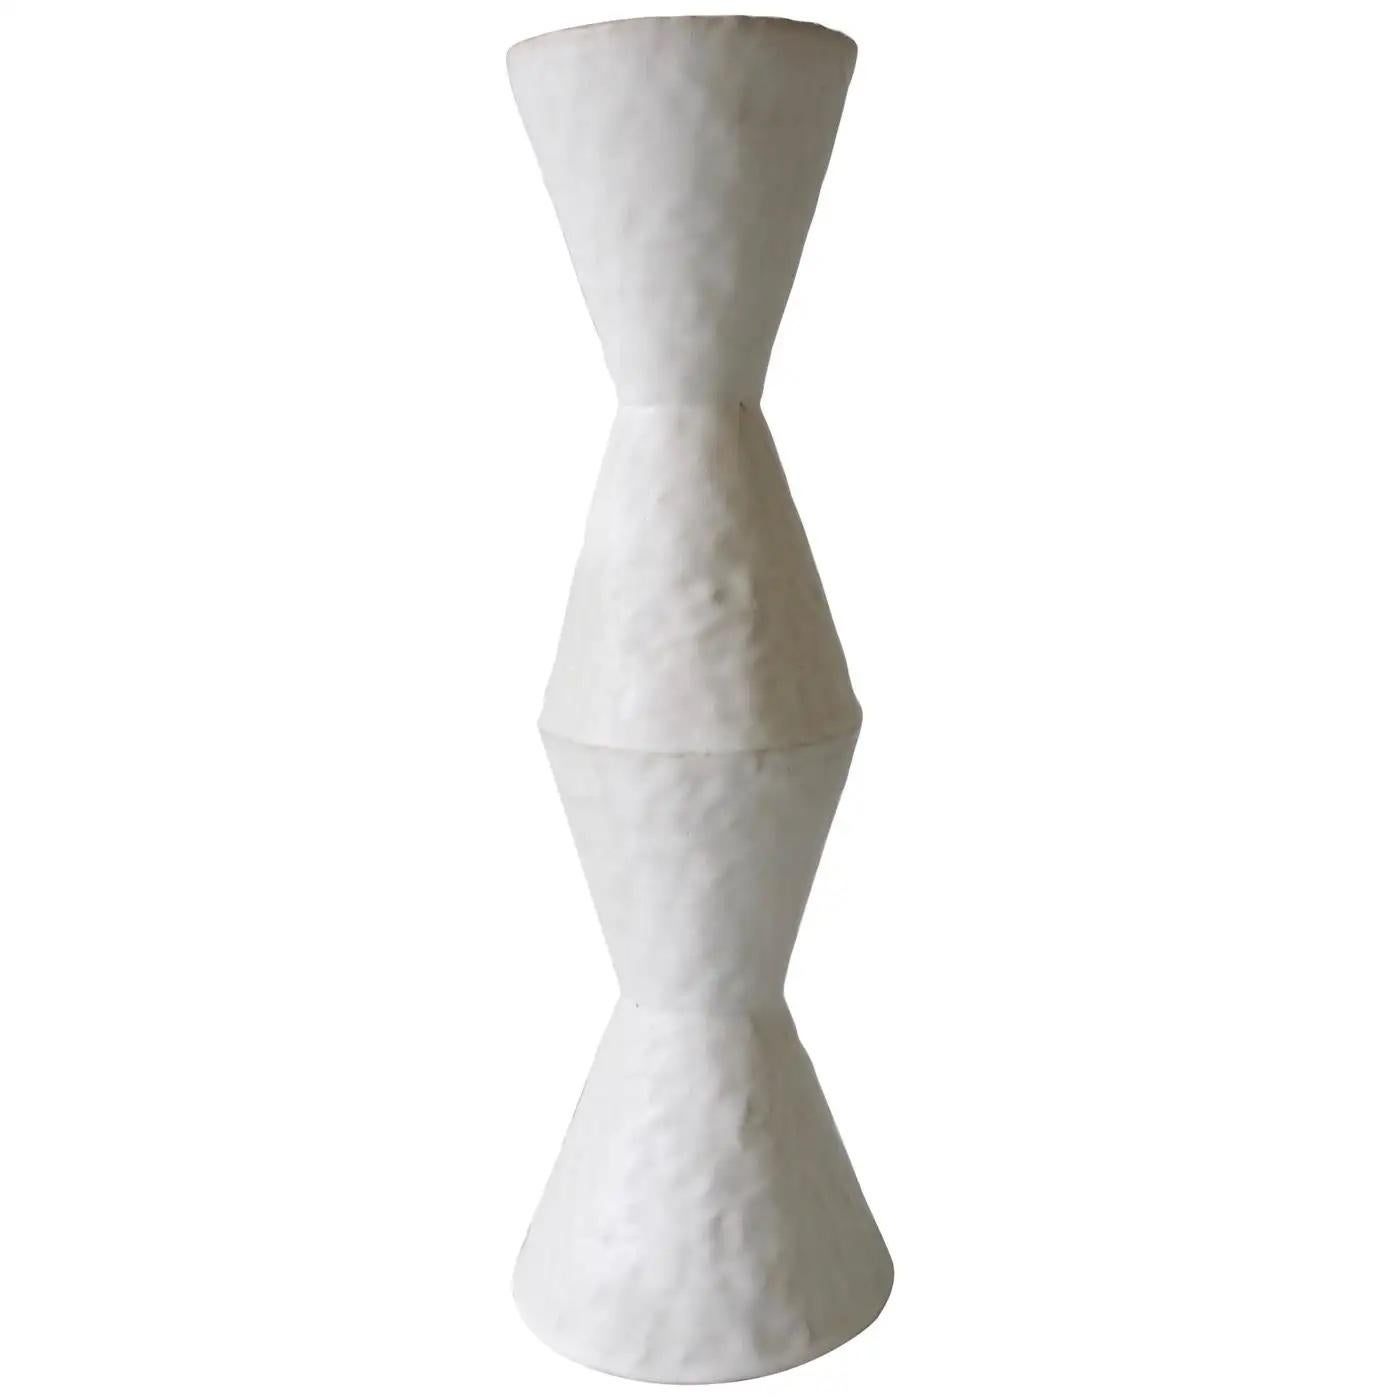 Contemporary American ceramic artist Giselle Hicks' glazed white stoneware vase is part of her Vessel Series. Each form is built by hand using a coil and pinch technique. They are formal explorations in shape, volume, color and composition. The